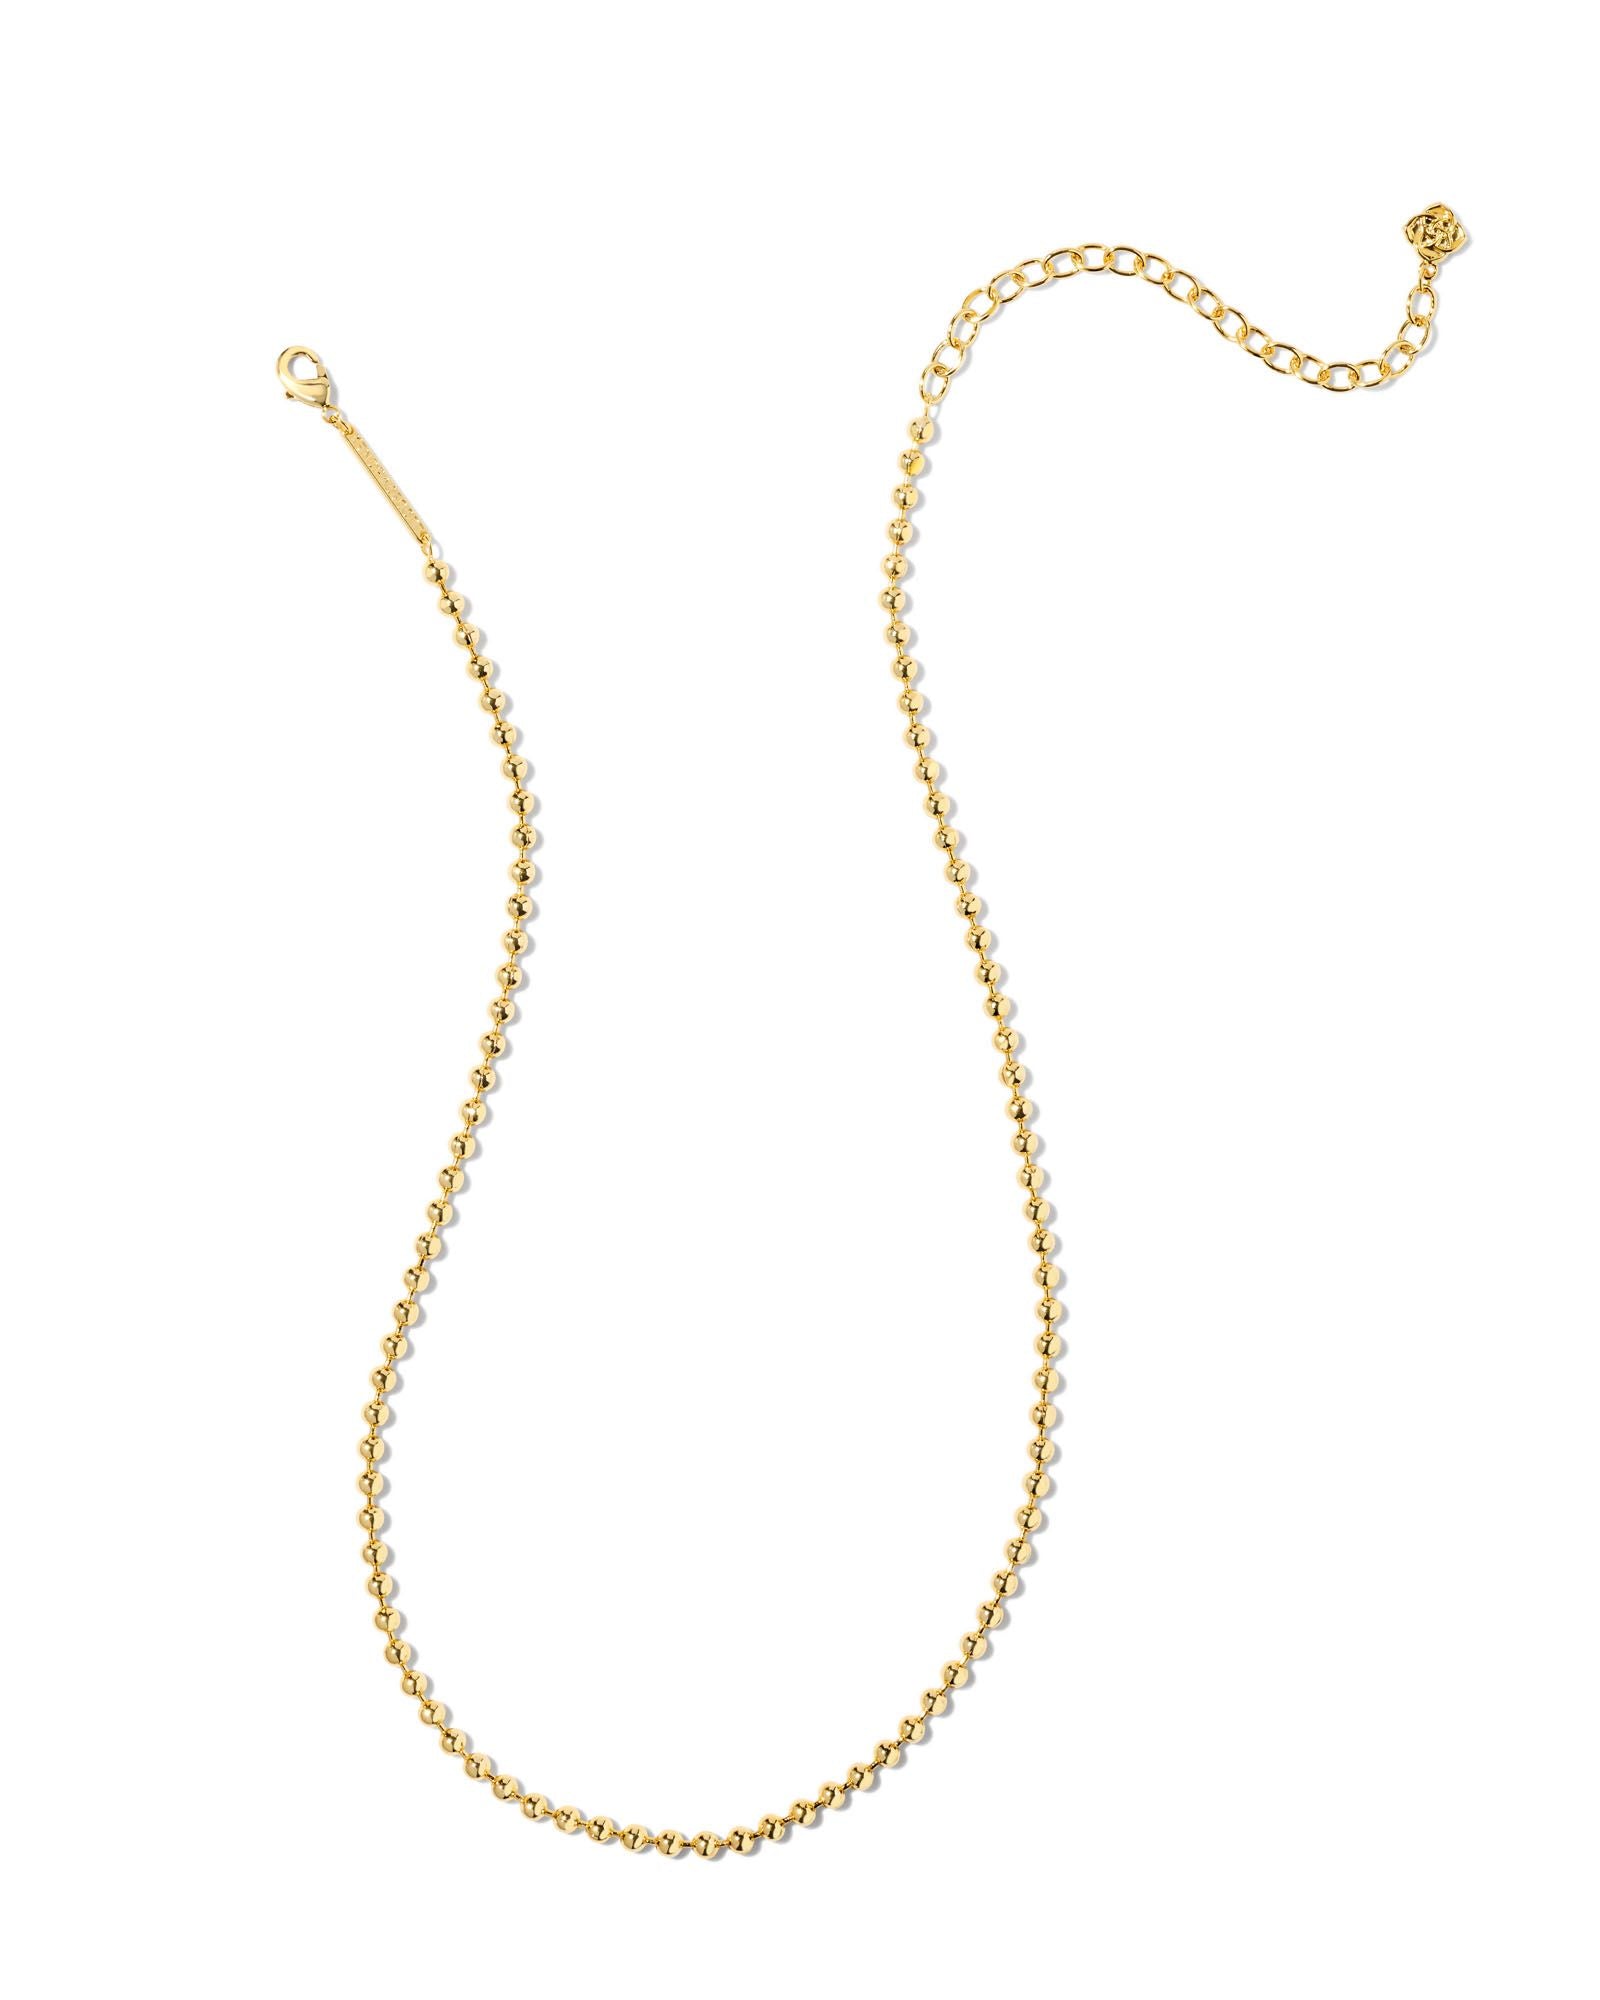 Oliver Chain Necklace in Gold Metal